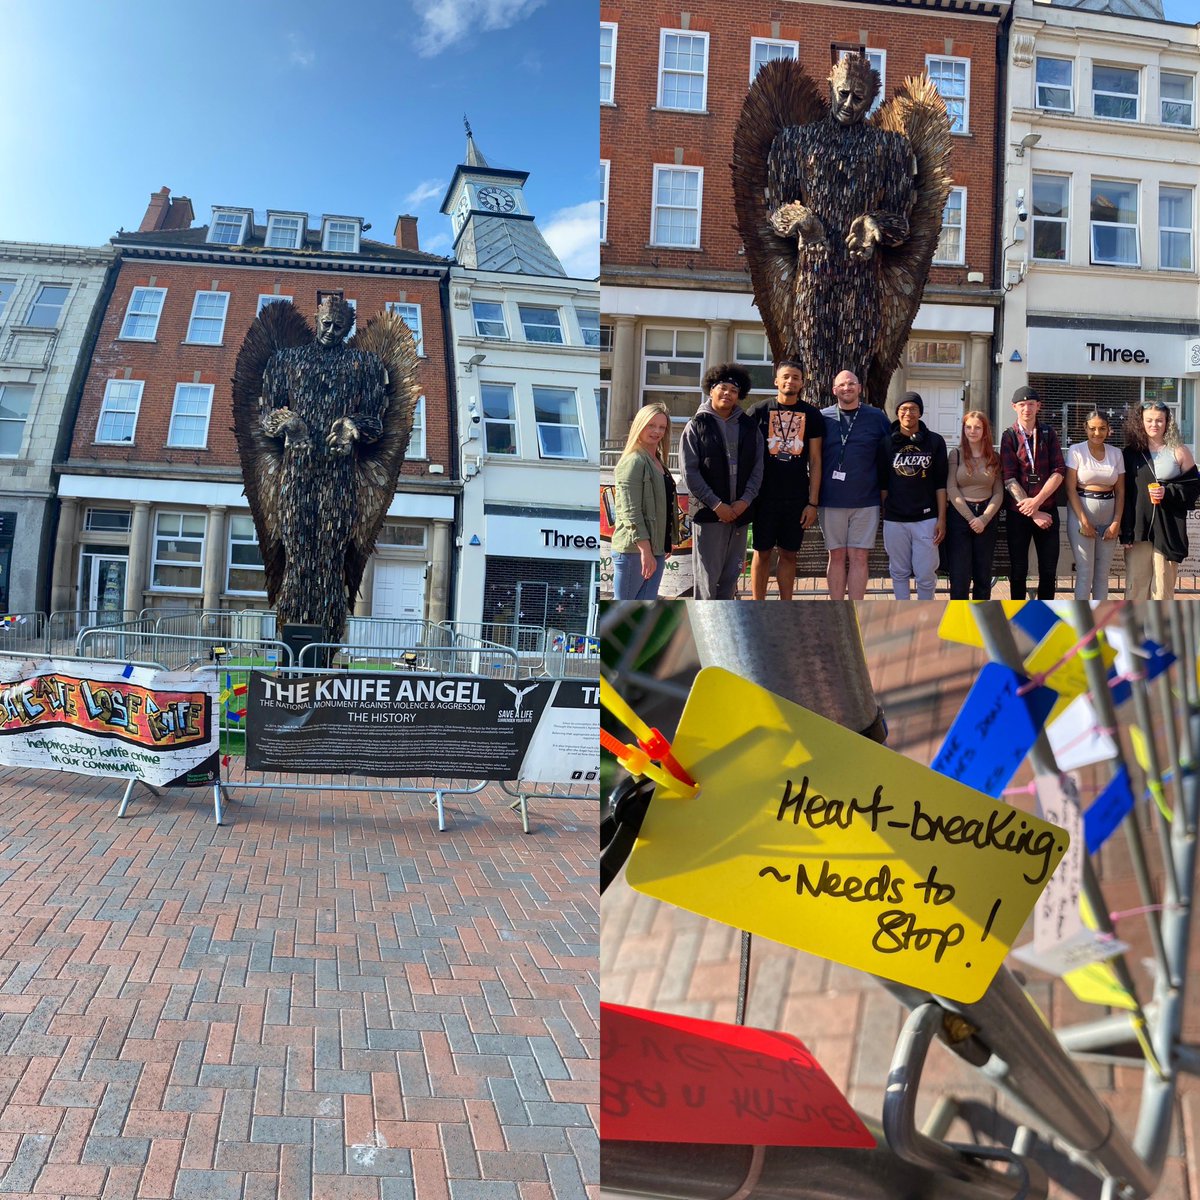 Cohort 5 visited #theknifeangel in Nuneaton! 

Very moving discussions about knife crime!

If one change can be made, let it be this one! 

@WarwickshireHo1 @TheNationalHP @NBBCouncil @MattSmi52866719 @Kelly_NHP 

#knifecrime 
#warwickshireHP 
#PositiveMindset 
#notoknifecrime